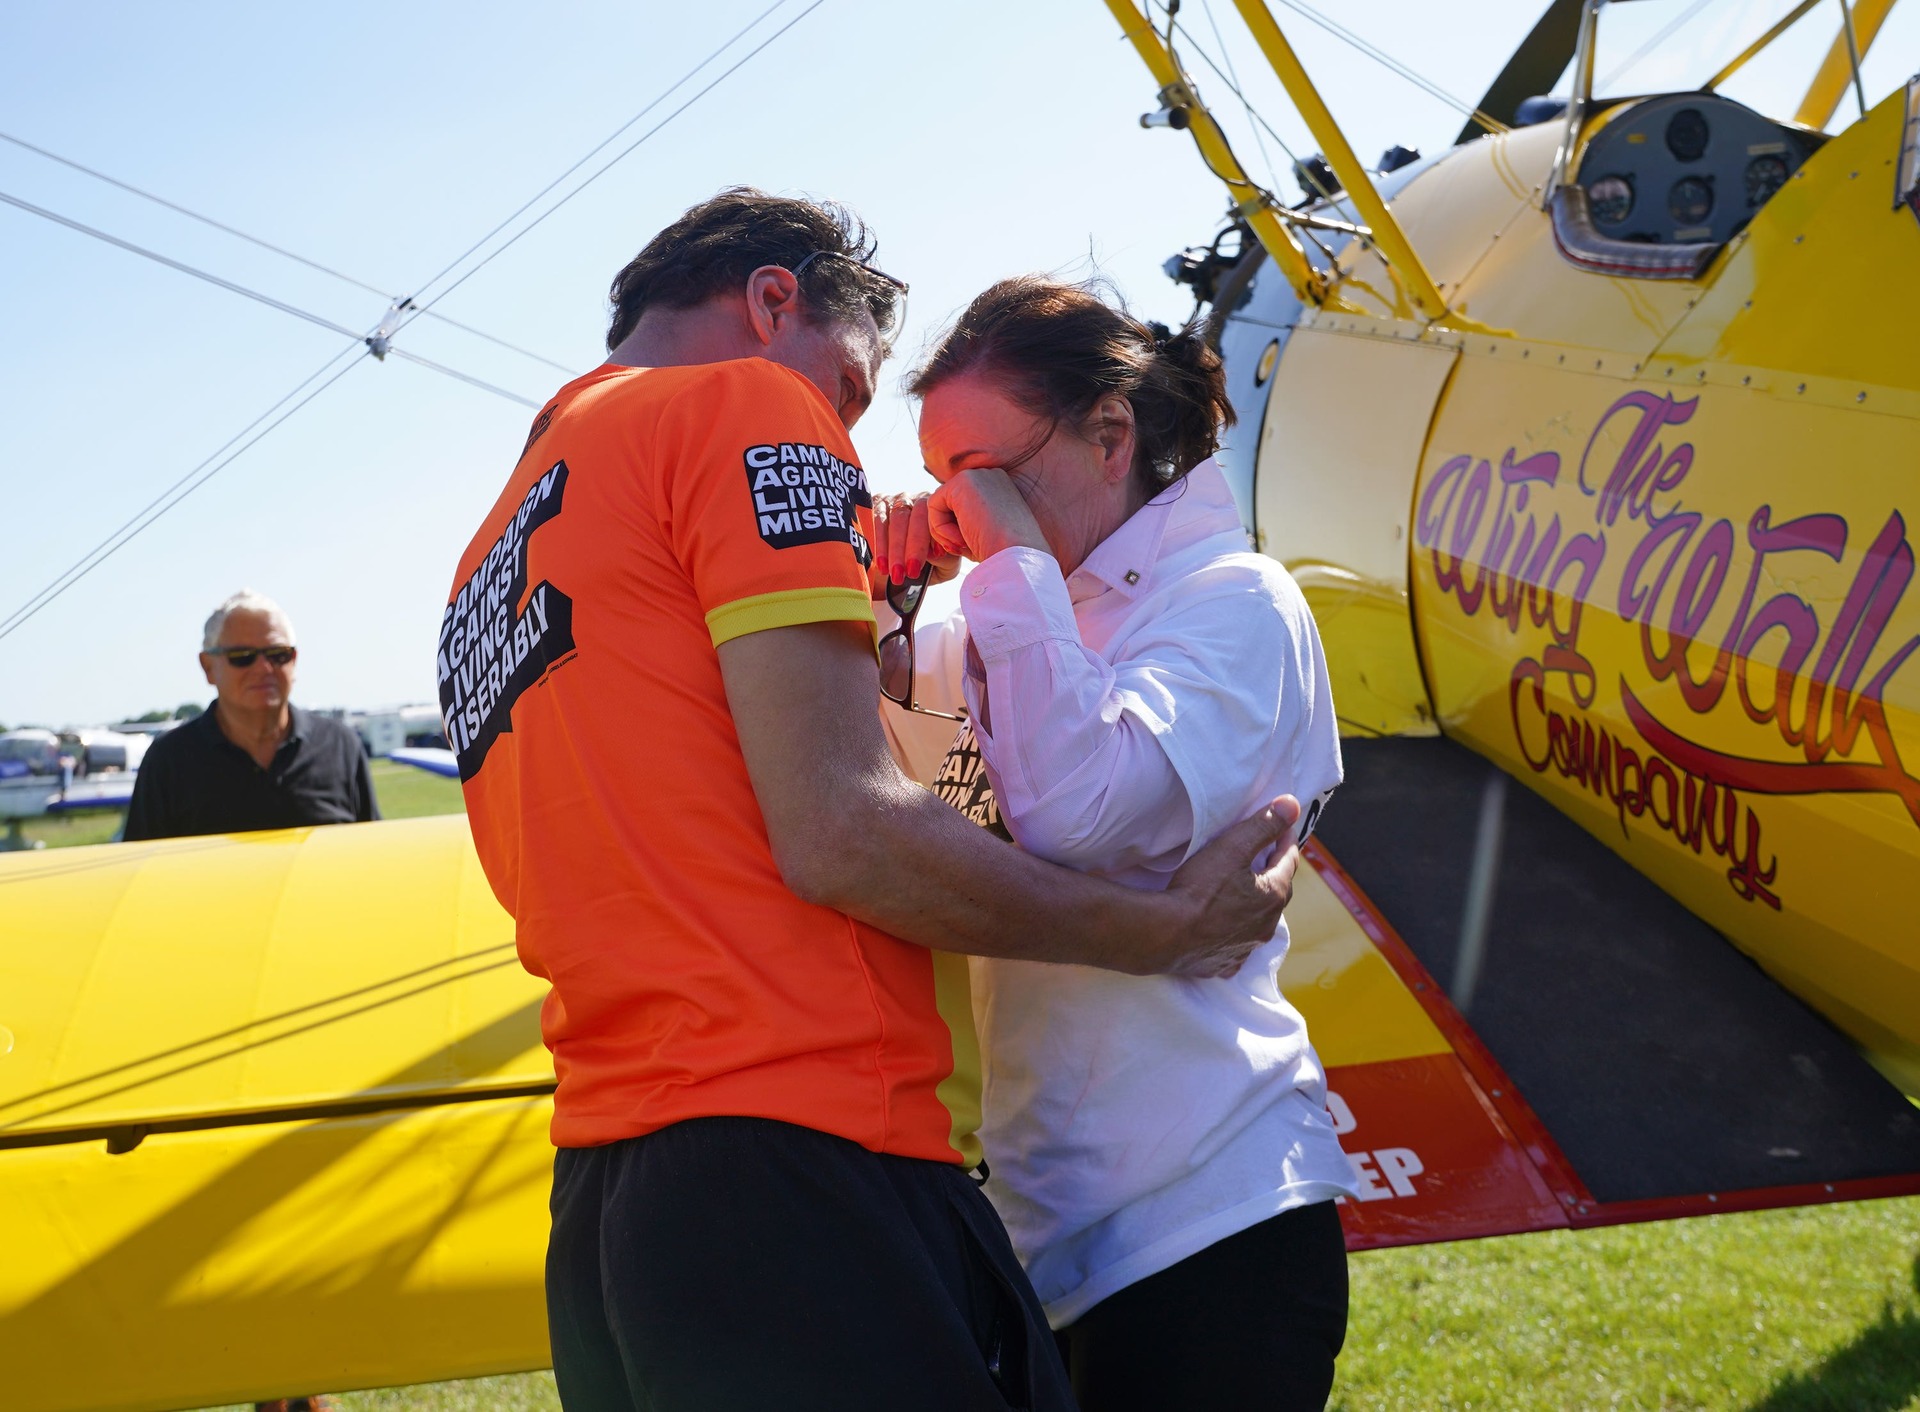 Shirley Ballas embraced by Daniel Taylor after completing her wing walk at 700ft in the Skyathlon challenge.